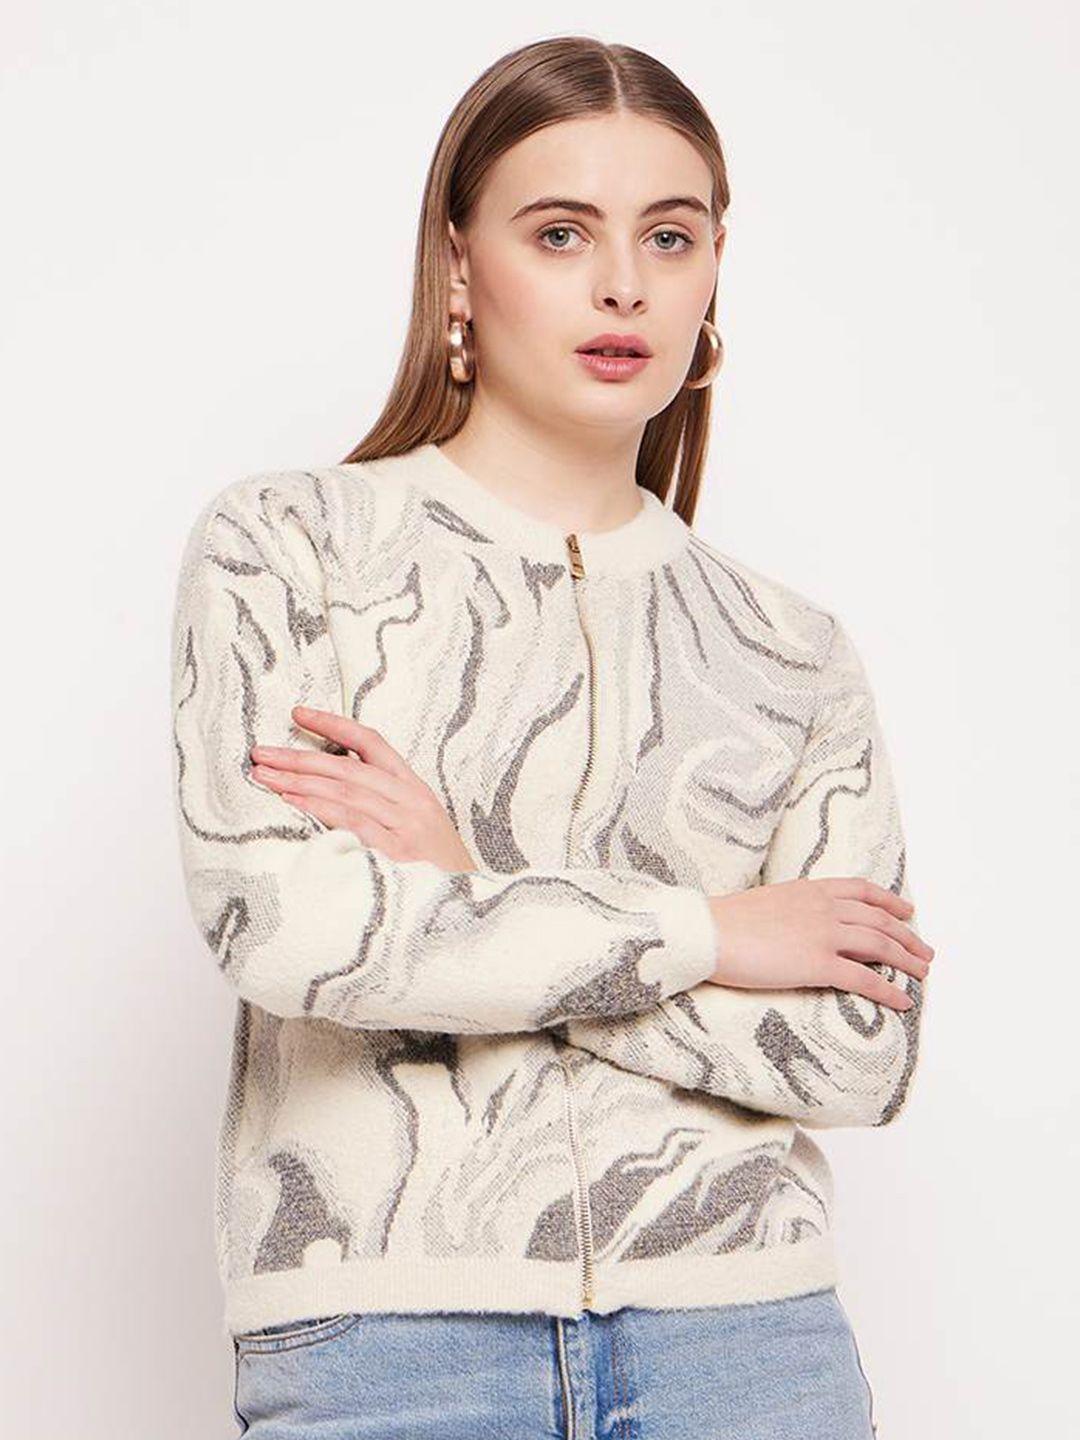 madame abstract printed cardigan sweater